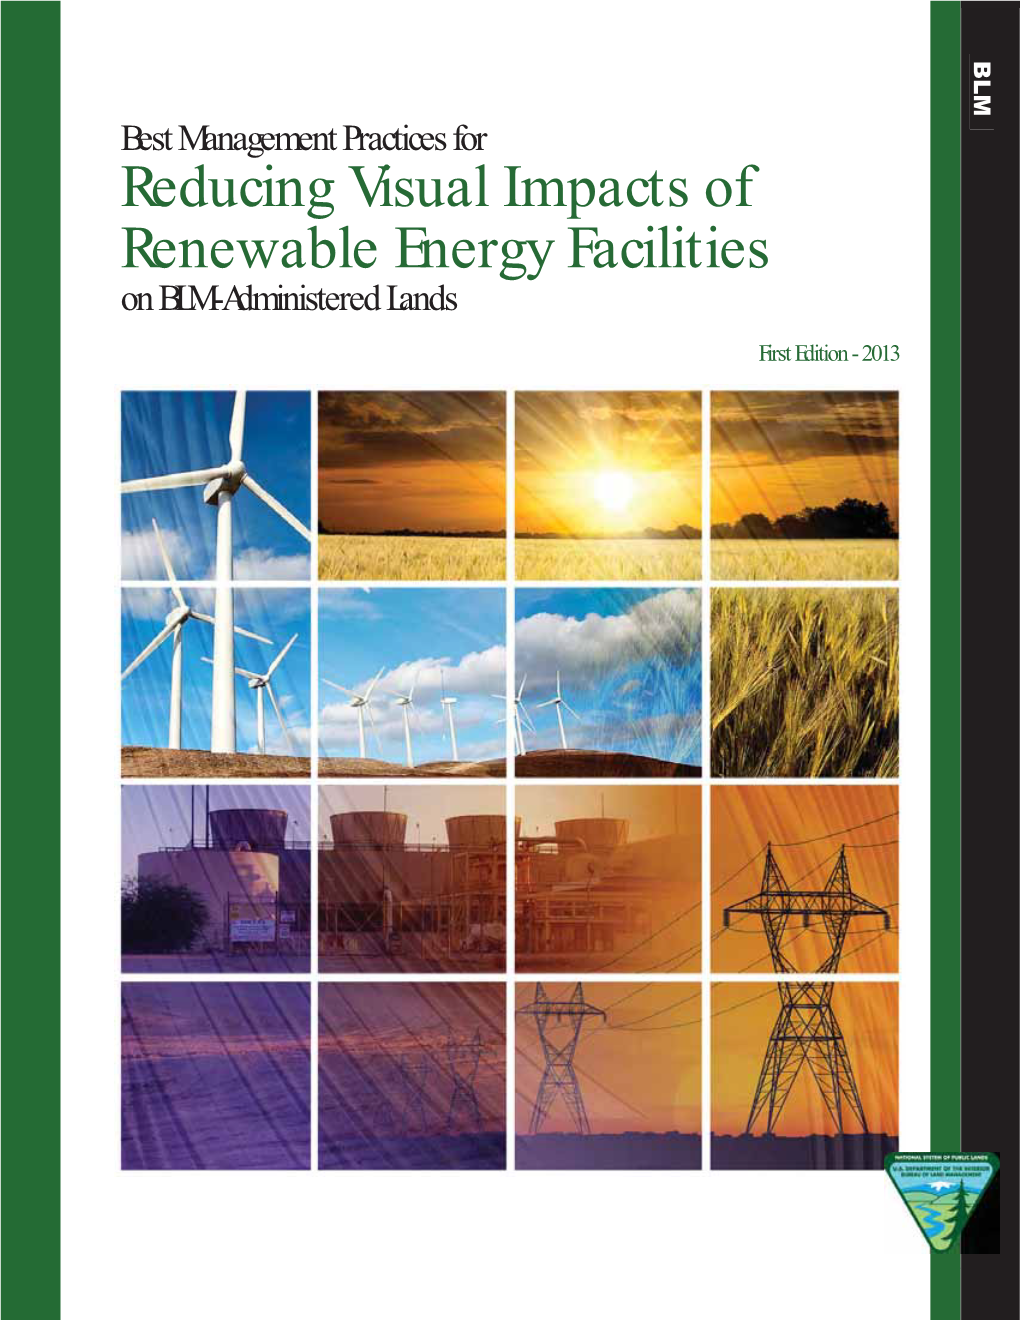 Reducing Visual Impacts of Renewable Energy Facilities on BLM-Administered Lands